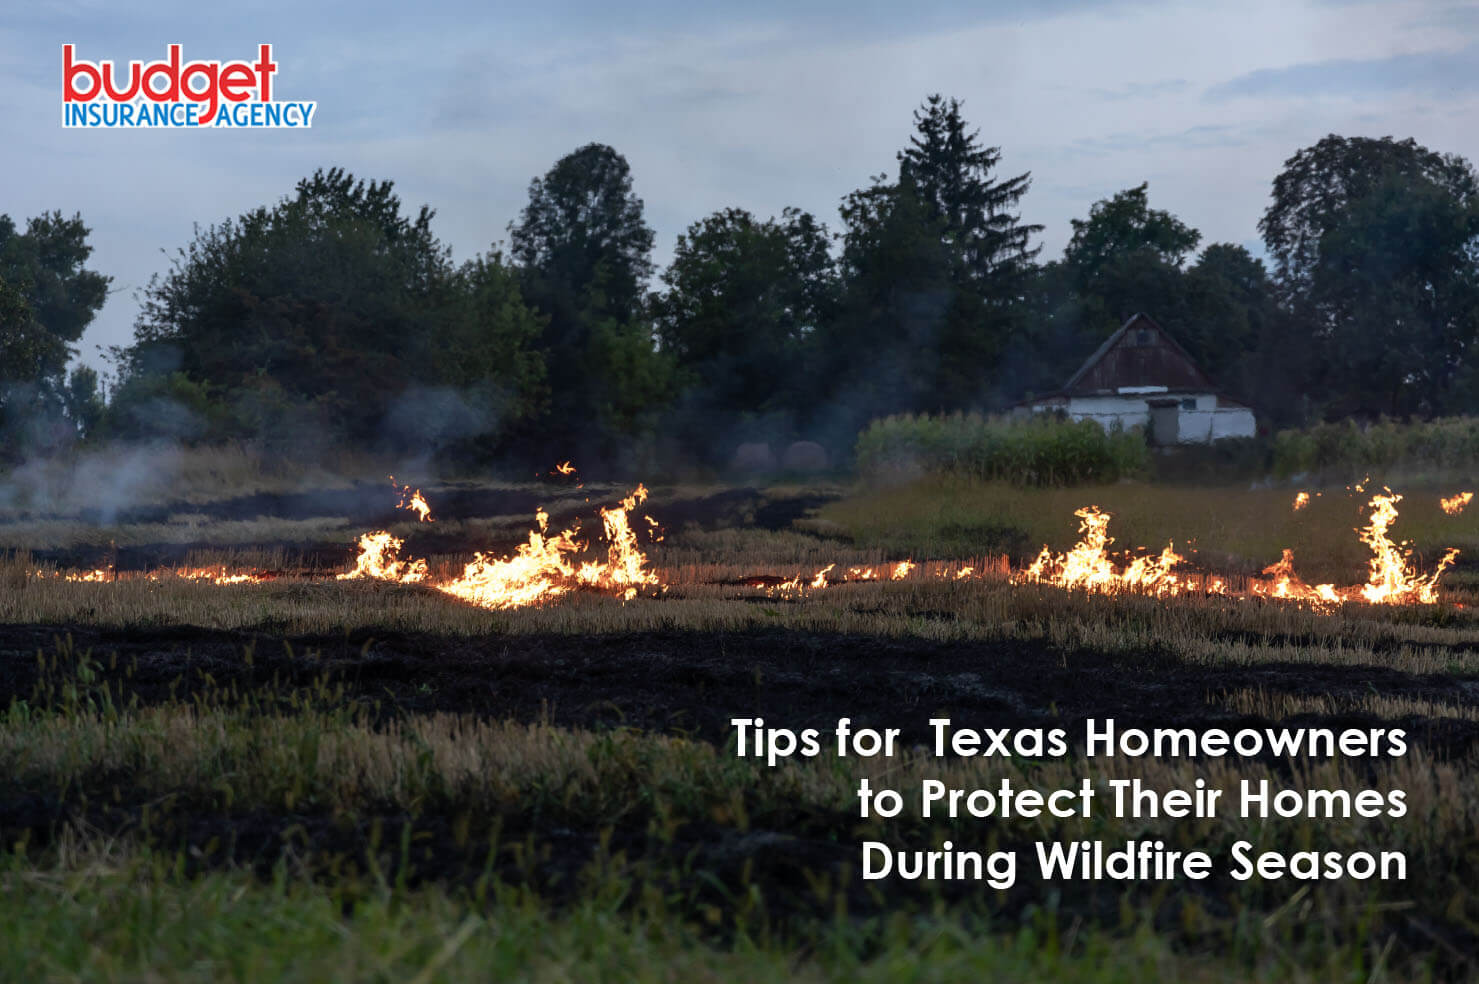 Tips for Texas Homeowners to Protect Their Homes During Wildfire Season